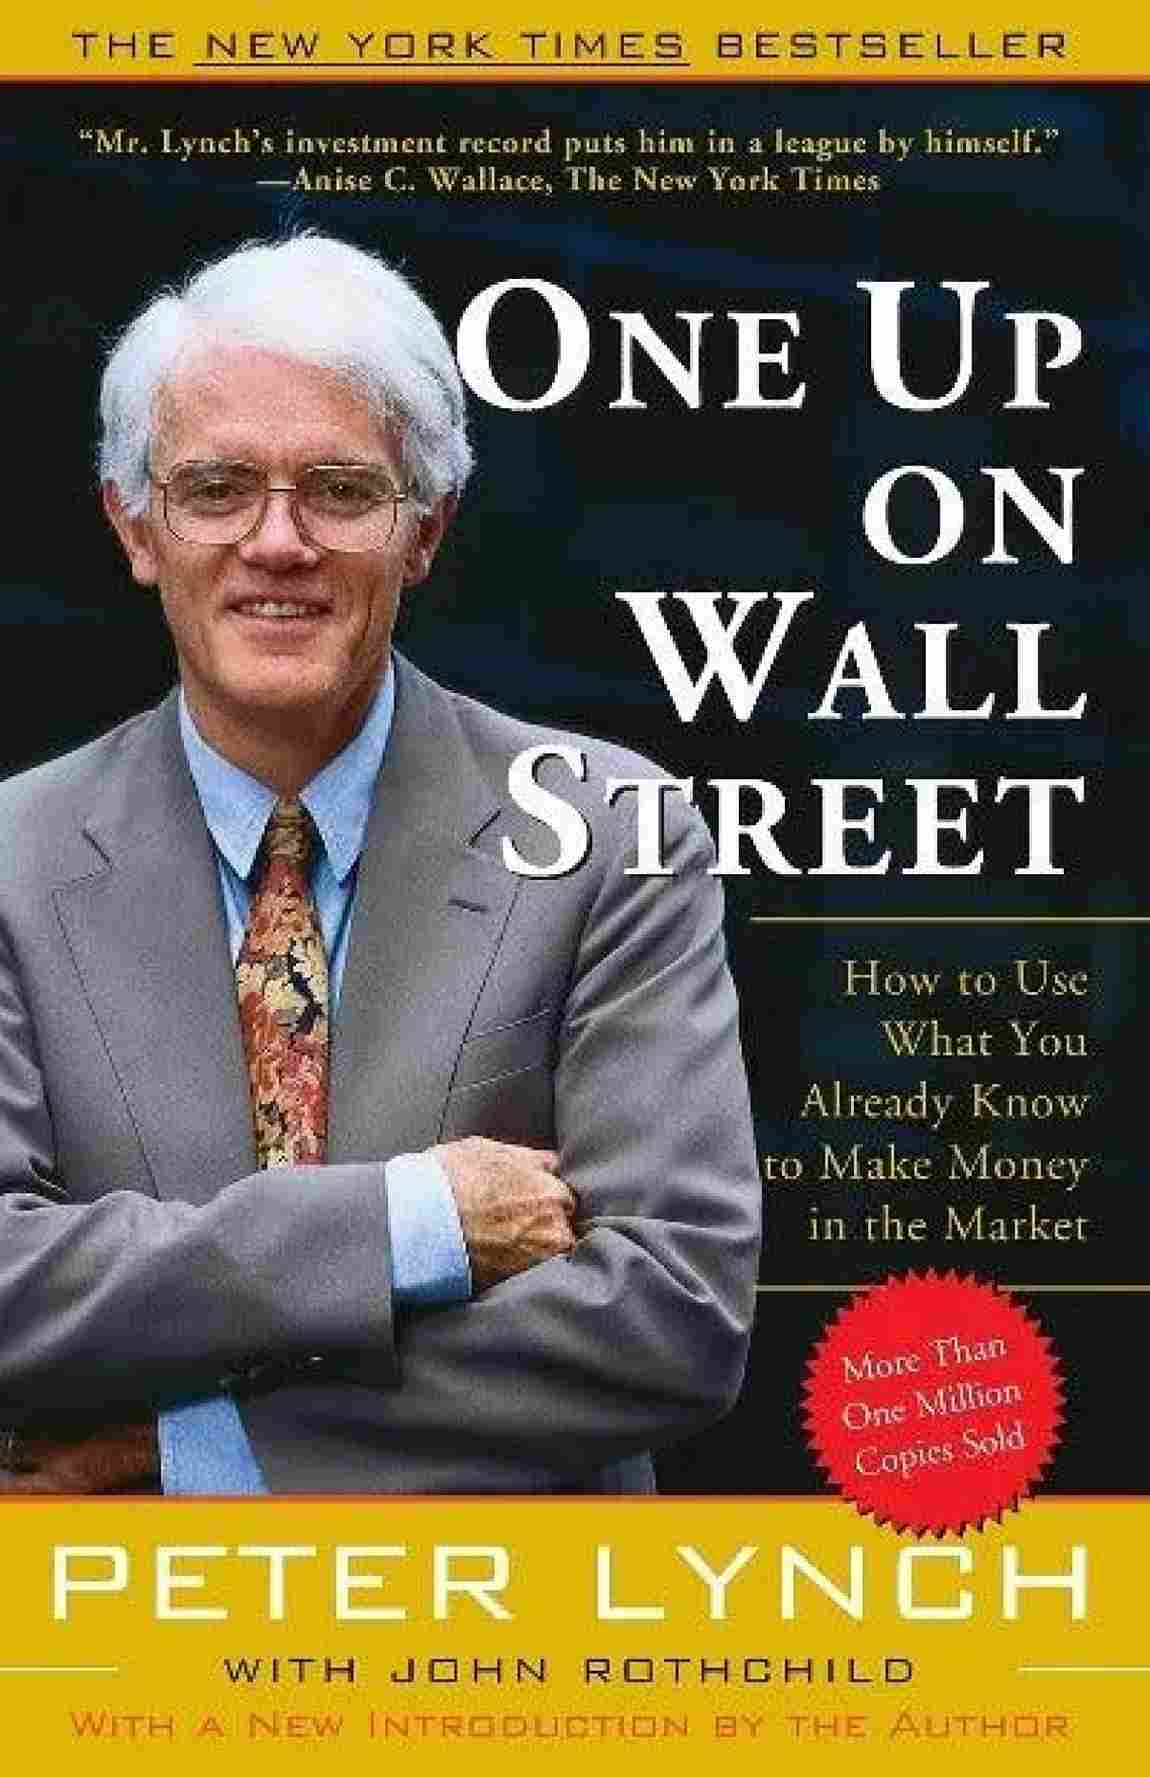 One Up Wall Street (Paperback) - Peter Lynch